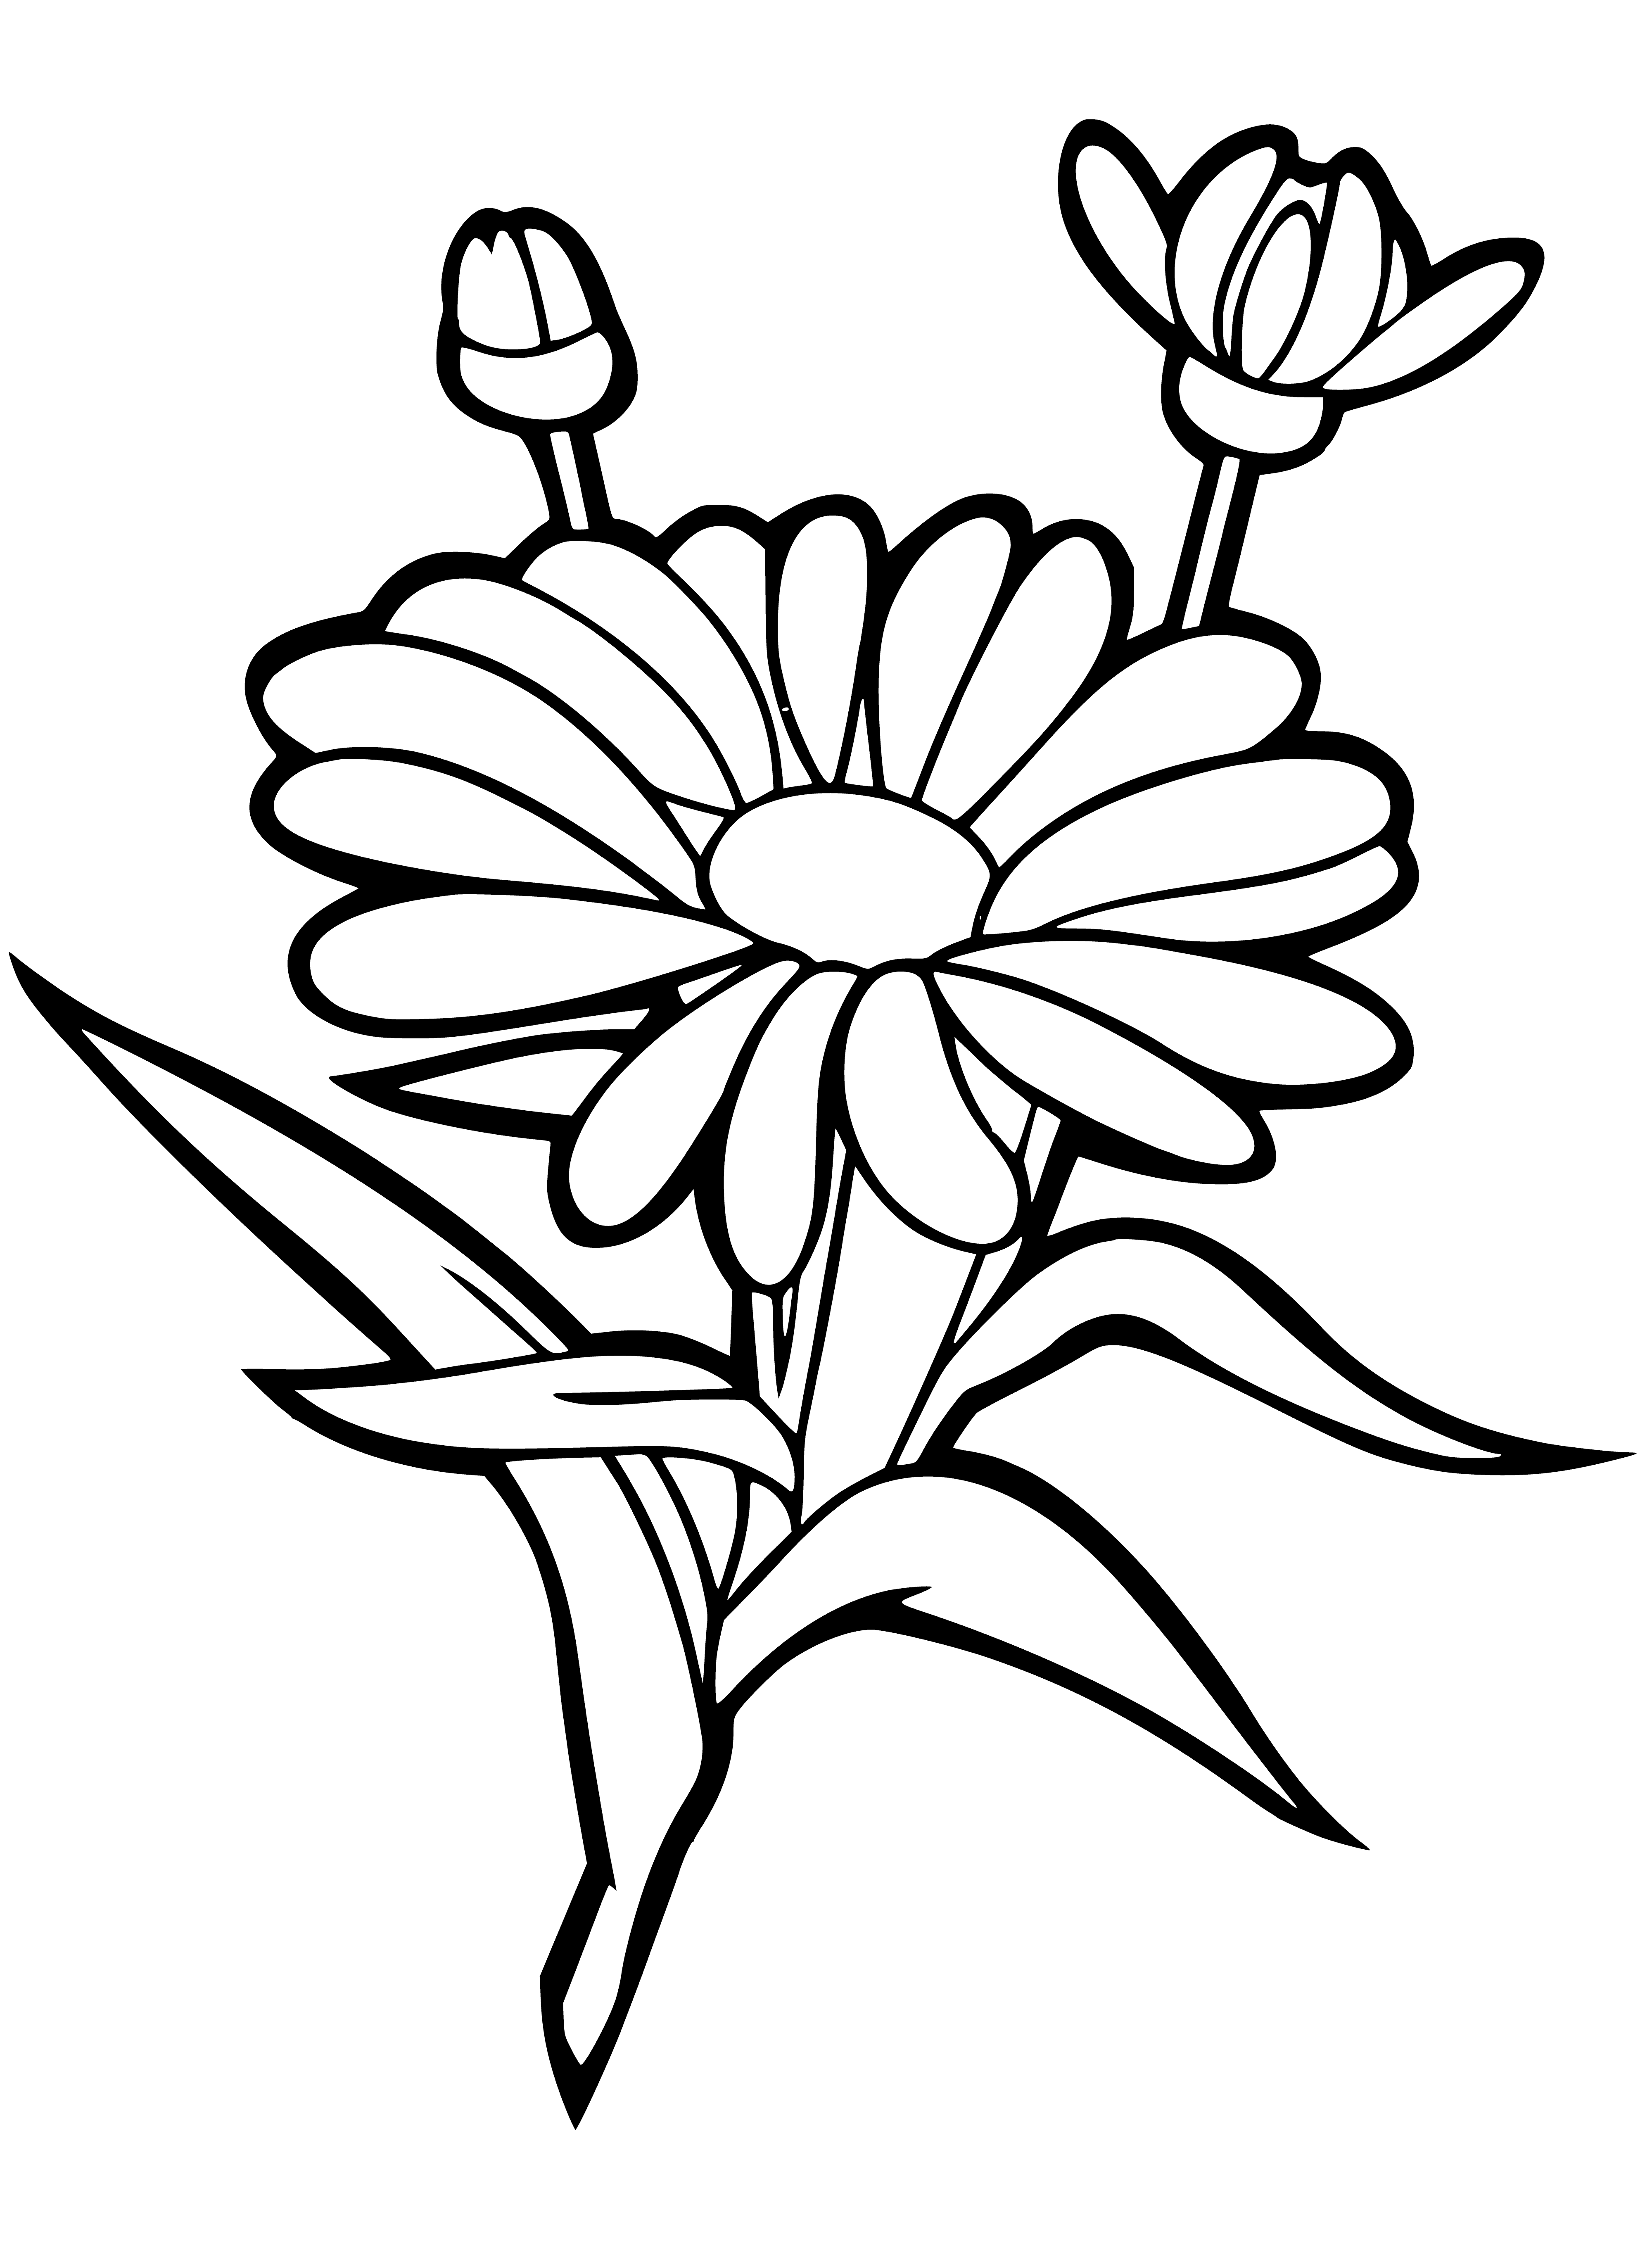 coloring page: Small, daisy-like flower with yellow center, white petals & a strong smell.